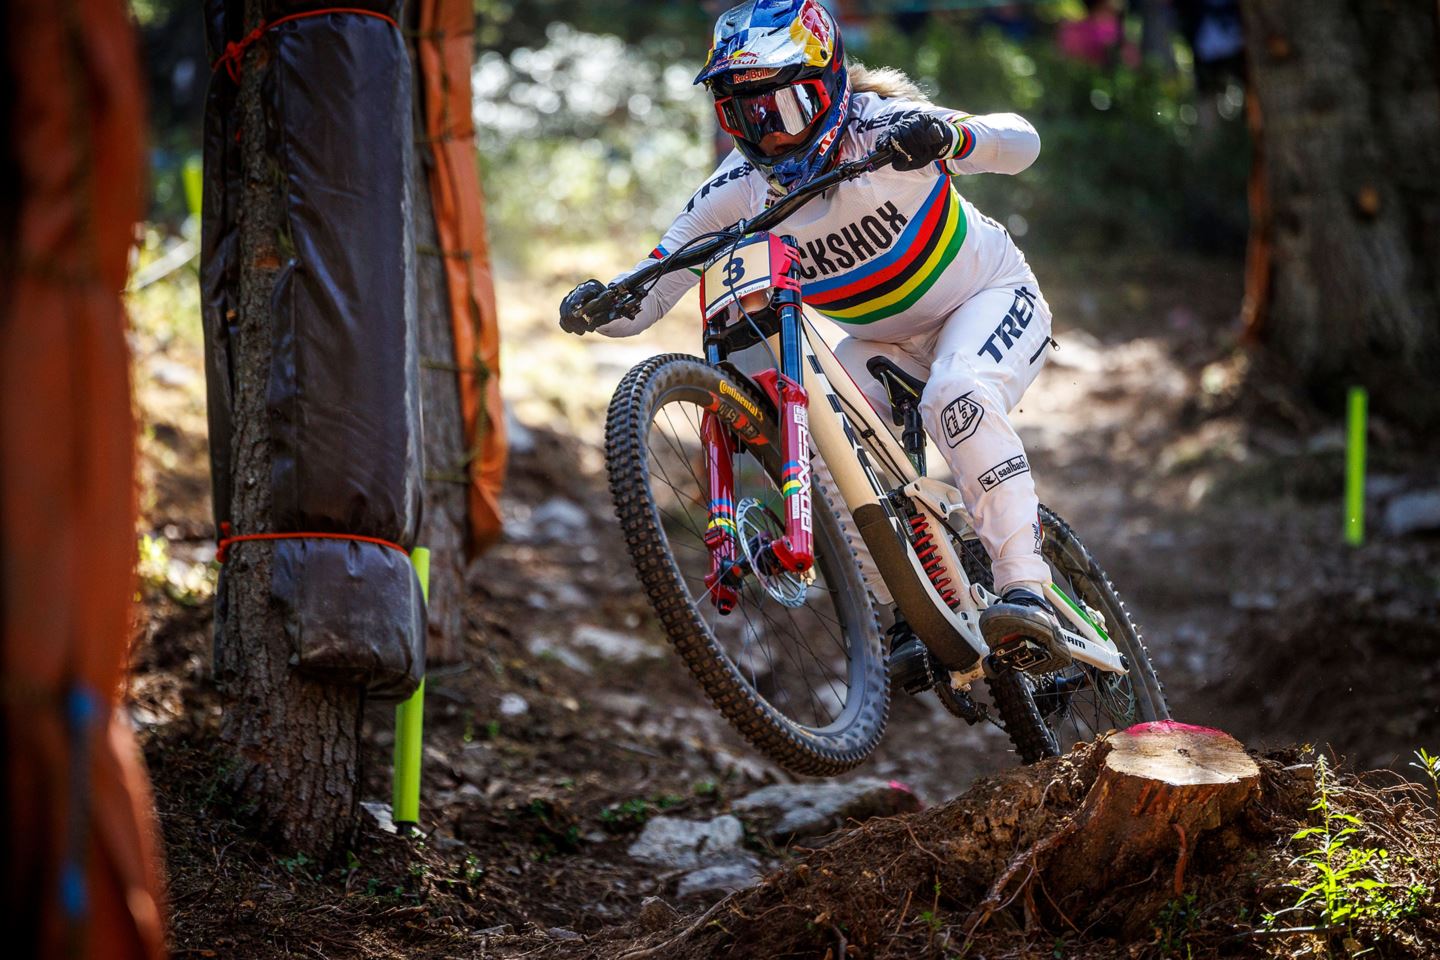 Vali Höll practicing in Andorra on her newly adorned World Champs bike and jersey.